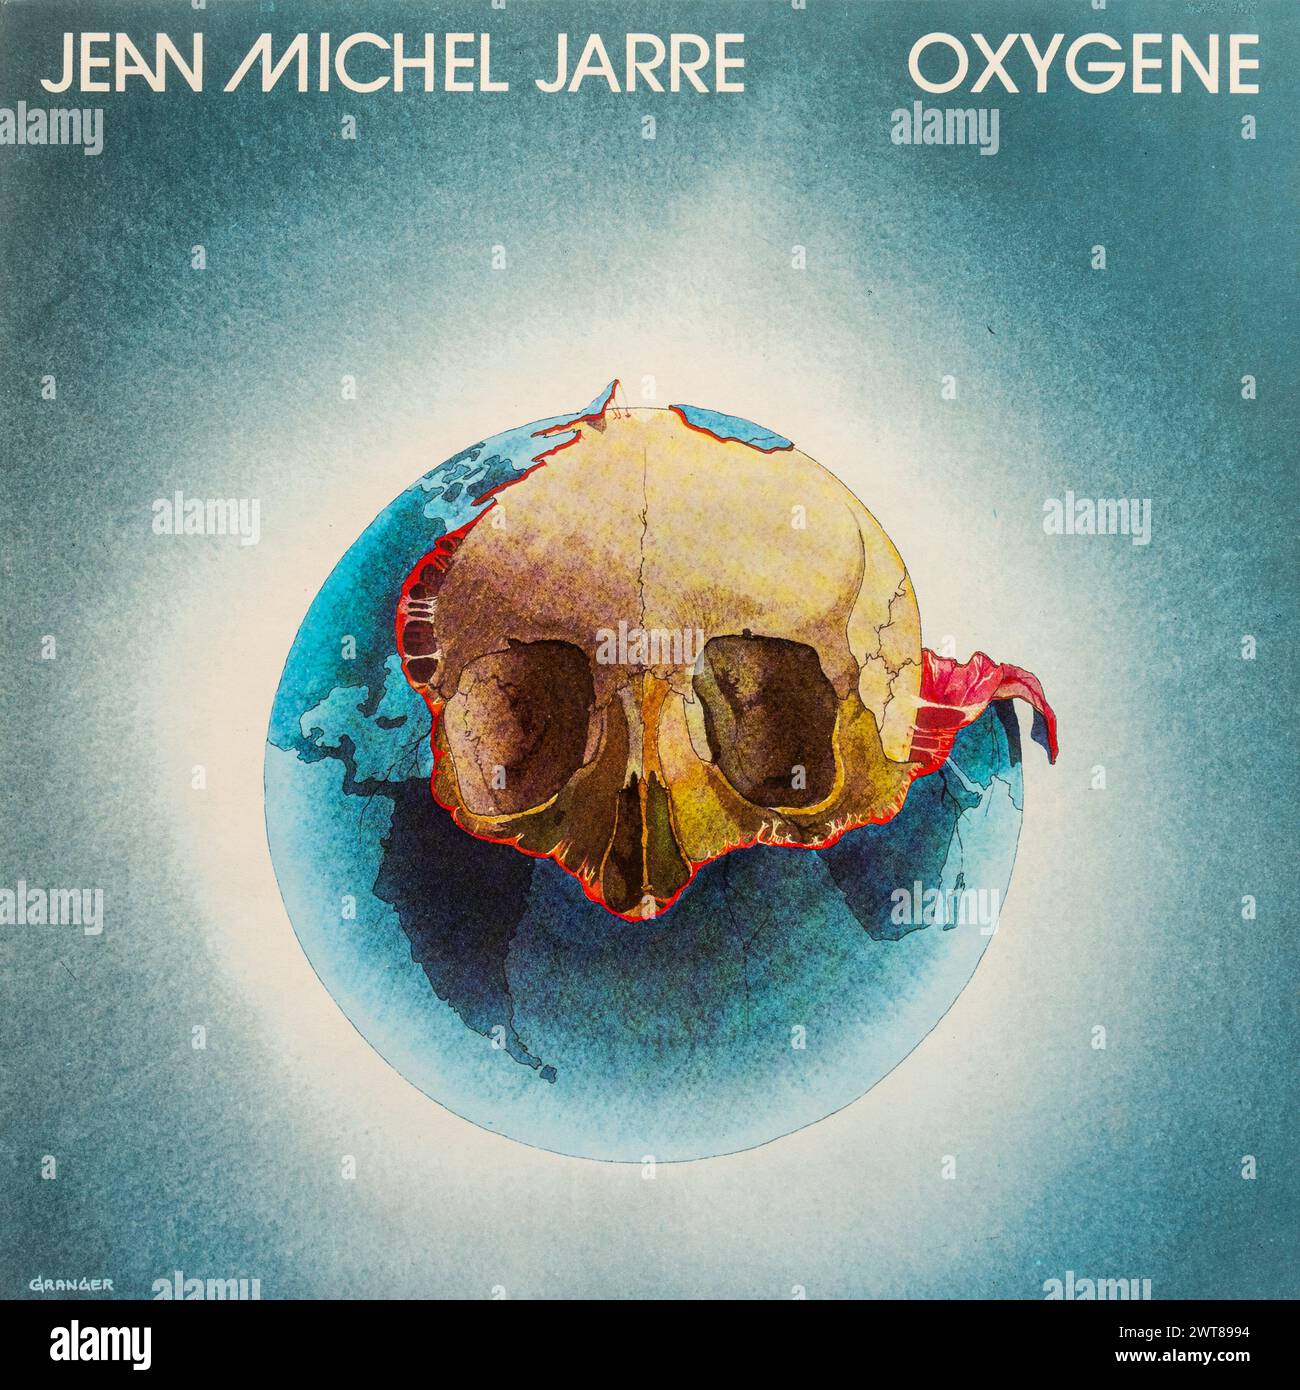 Oxygene by Jean-Michel Jarre, a French electronic musician, vinyl LP record album cover Stock Photo